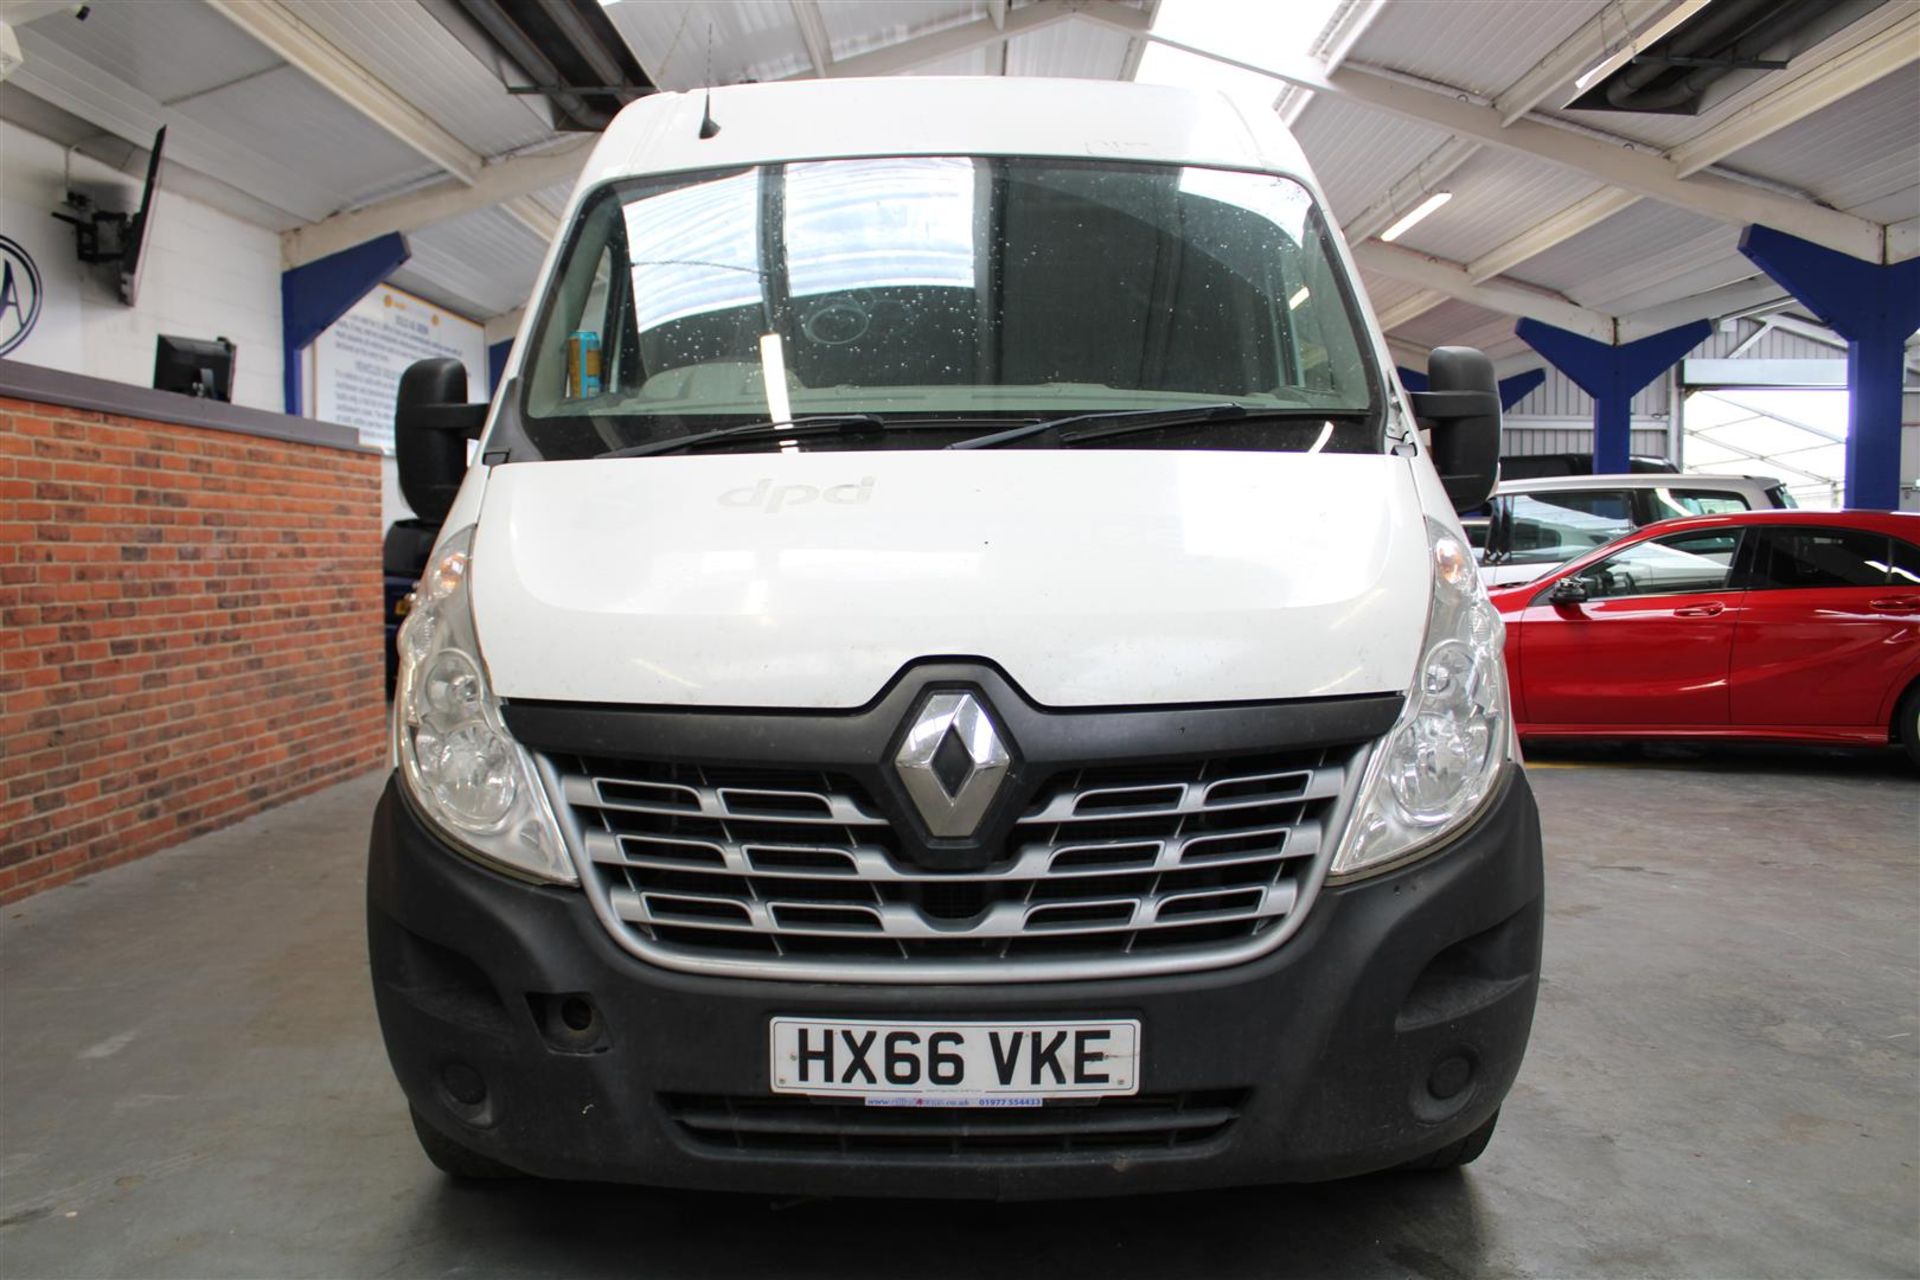 66 16 Renault Master LM35 Business - Image 2 of 30